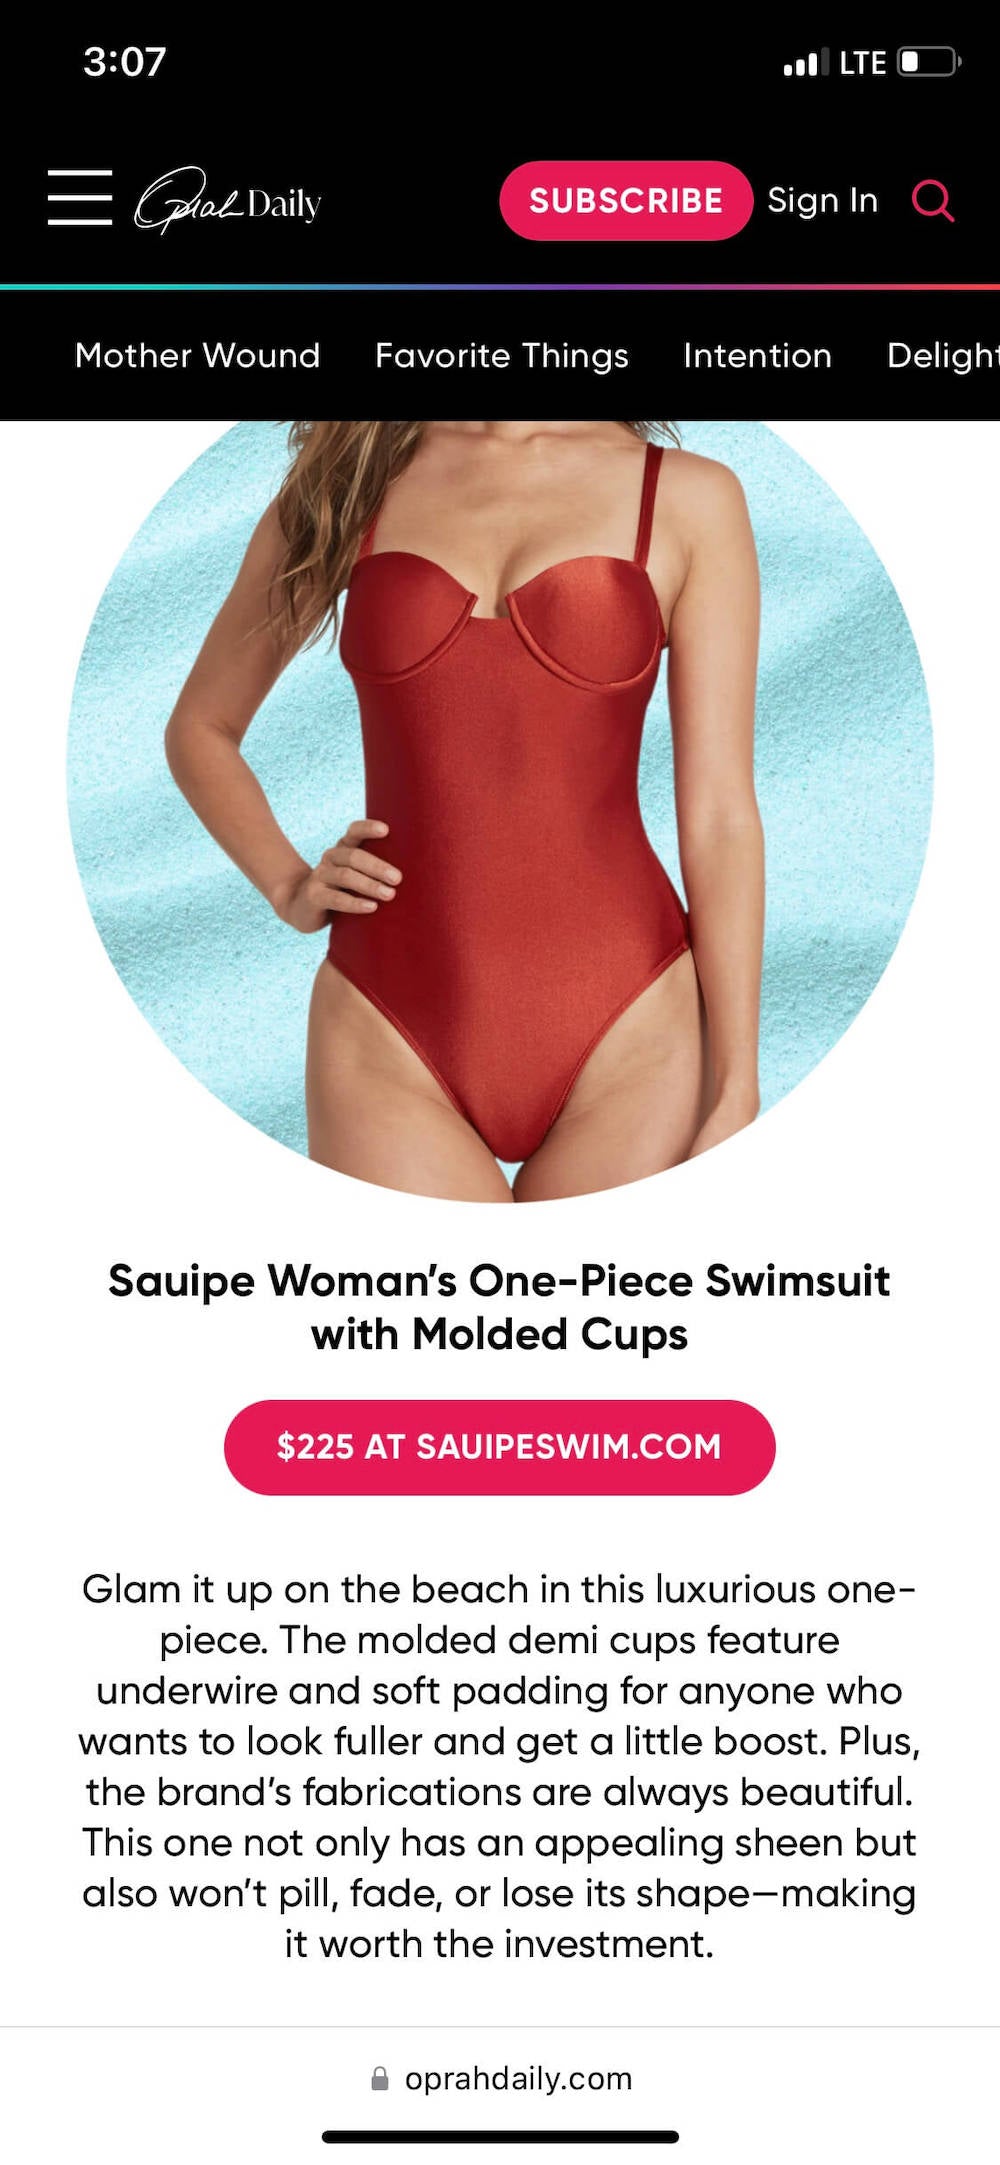 The Victoria swimsuit has been awarded the best one piece swimsuit for small bust by Oprah Daily.